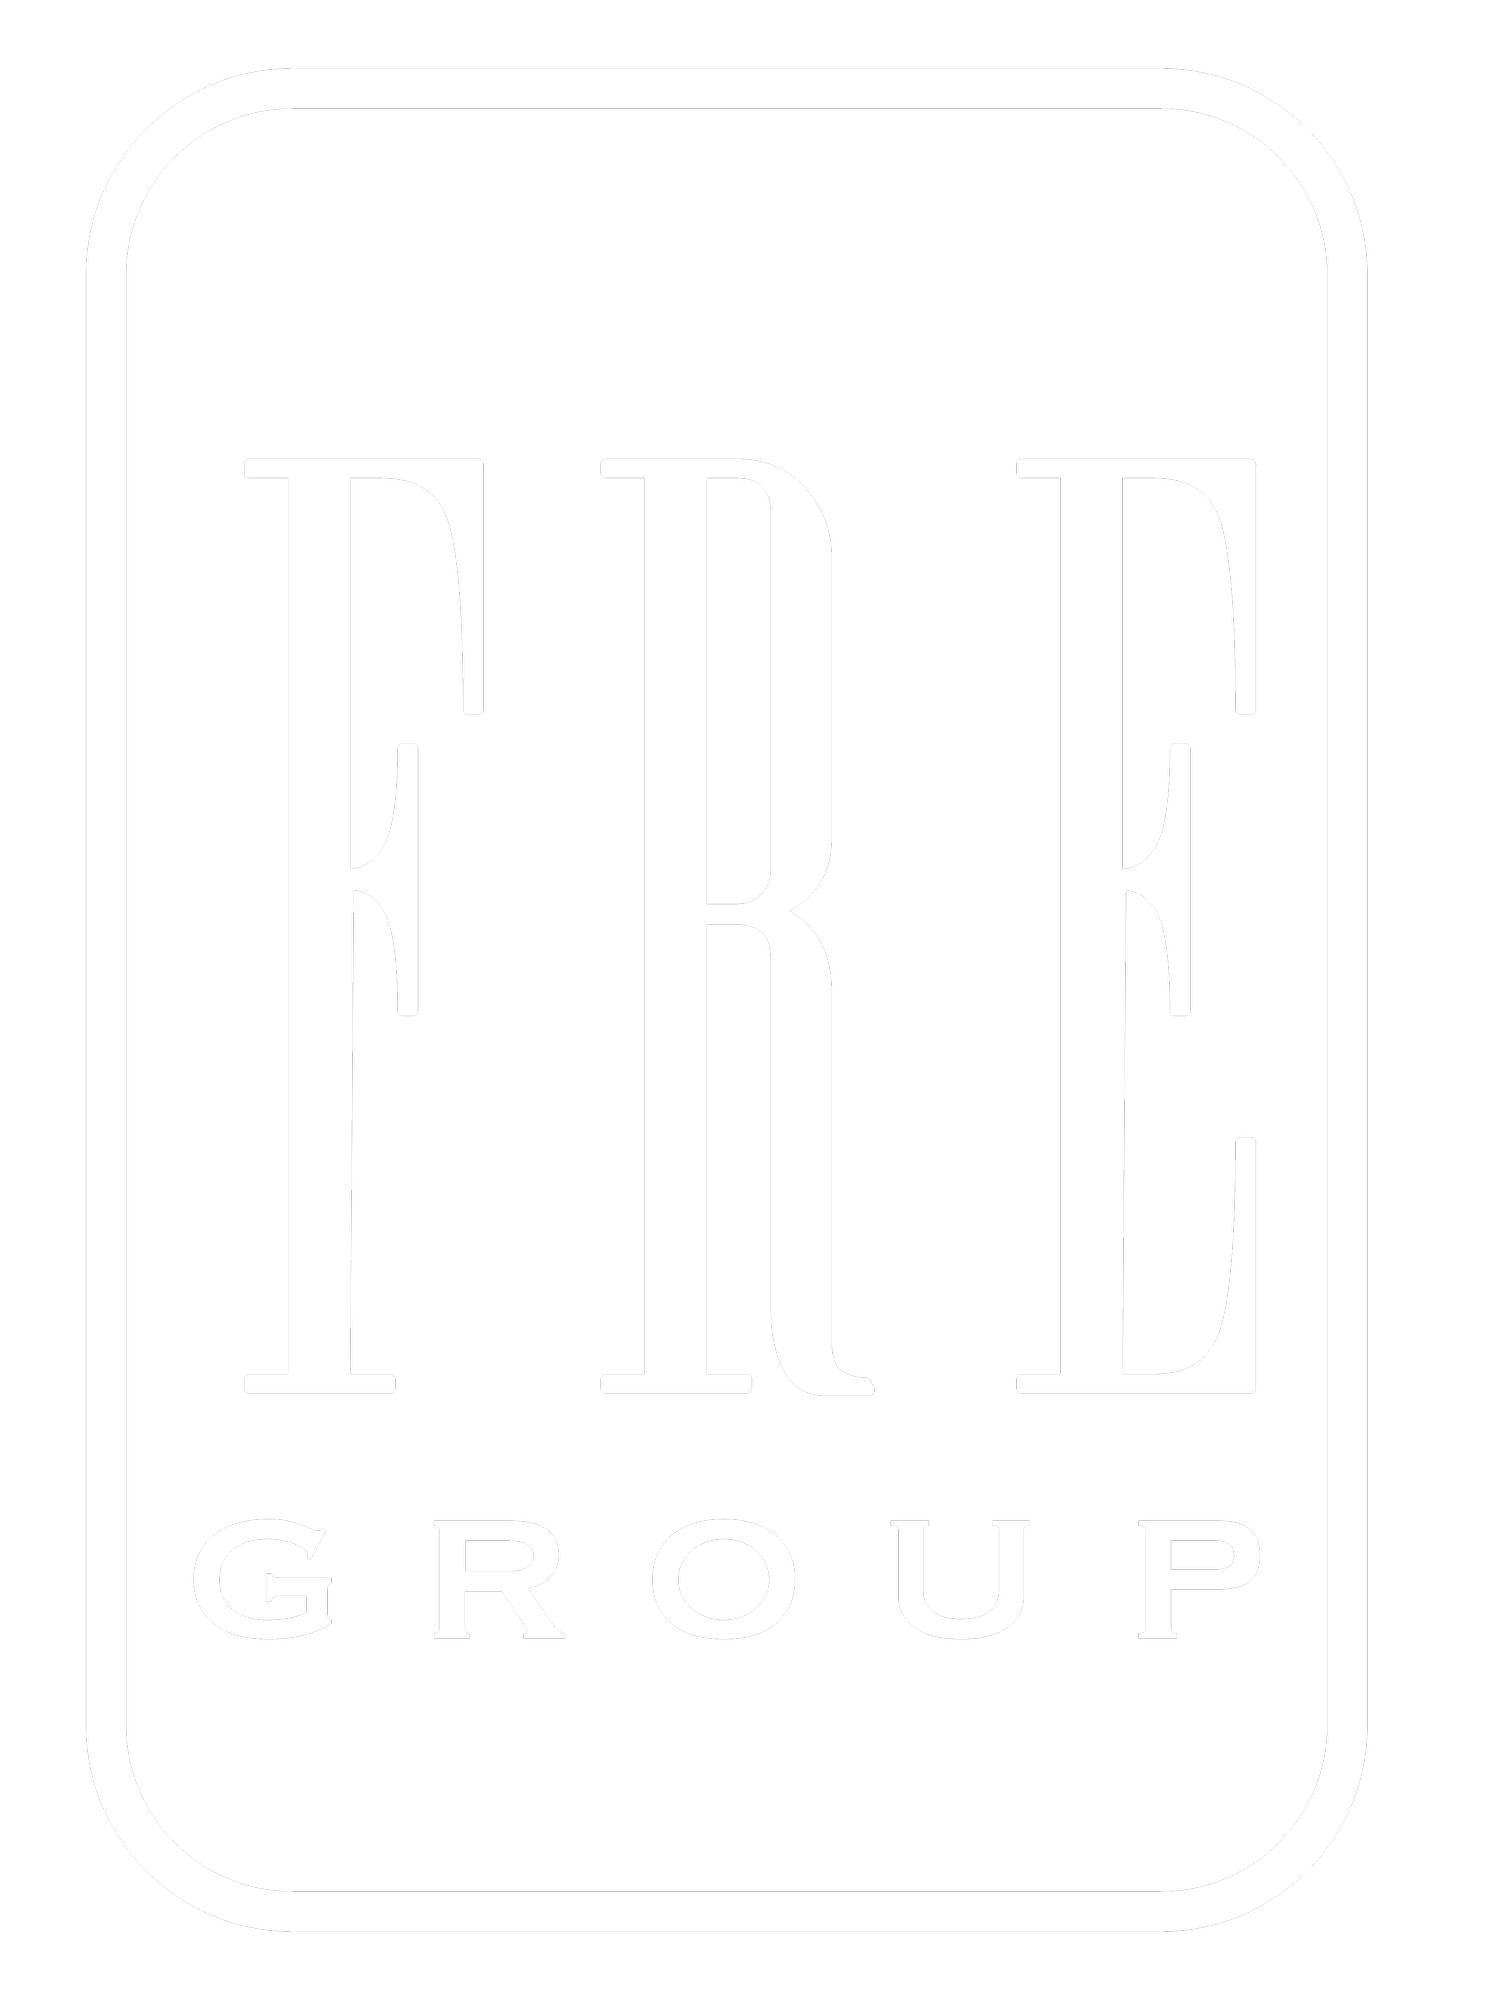 FRE Group